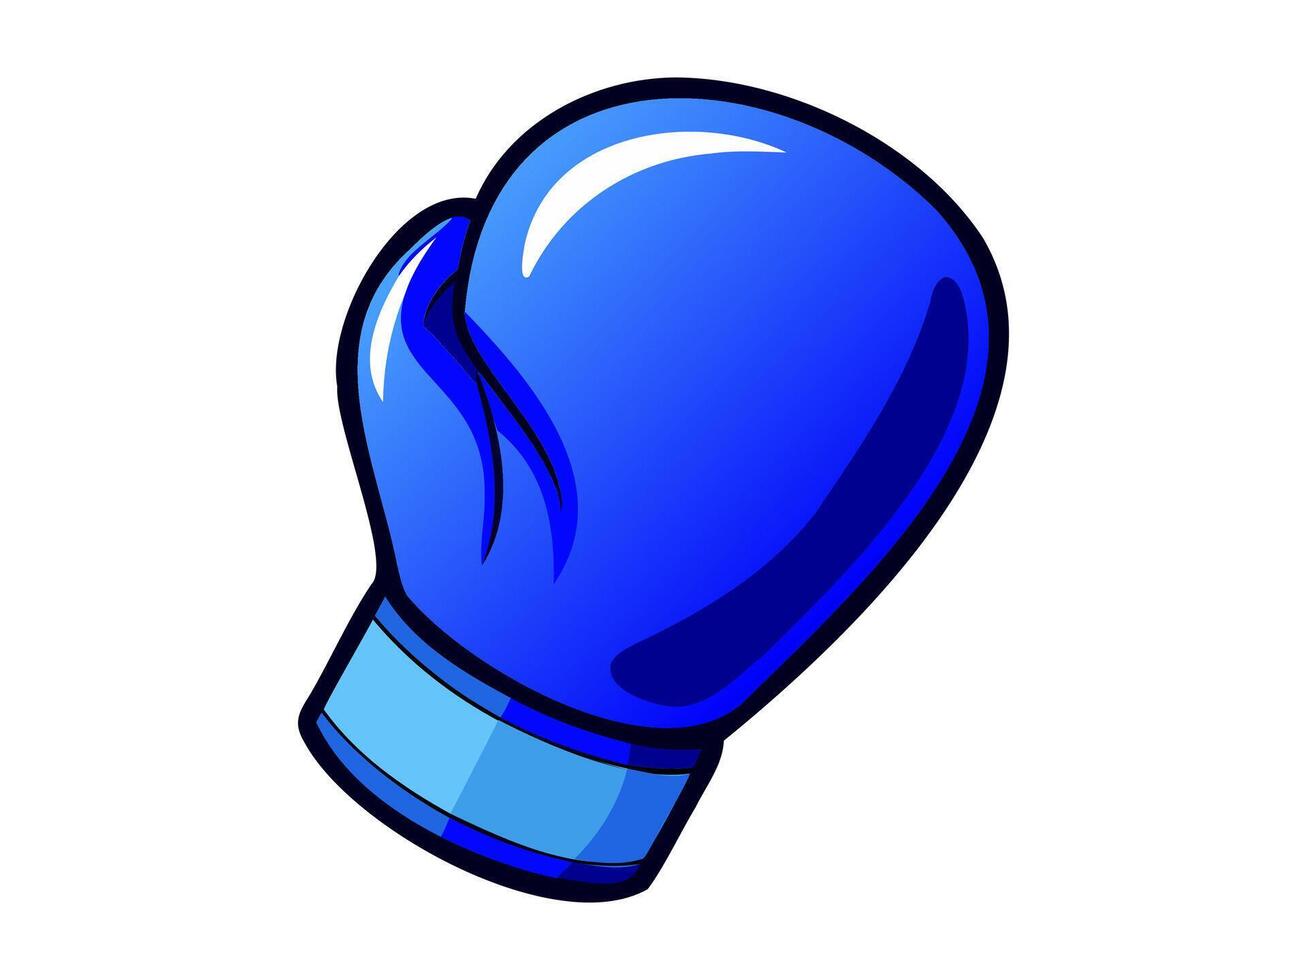 Blue boxing glove illustration. Single sporting glove with a simplistic design. Concept of sports equipment, boxing training, athletic gear, combat sports. Isolated on white backdrop vector